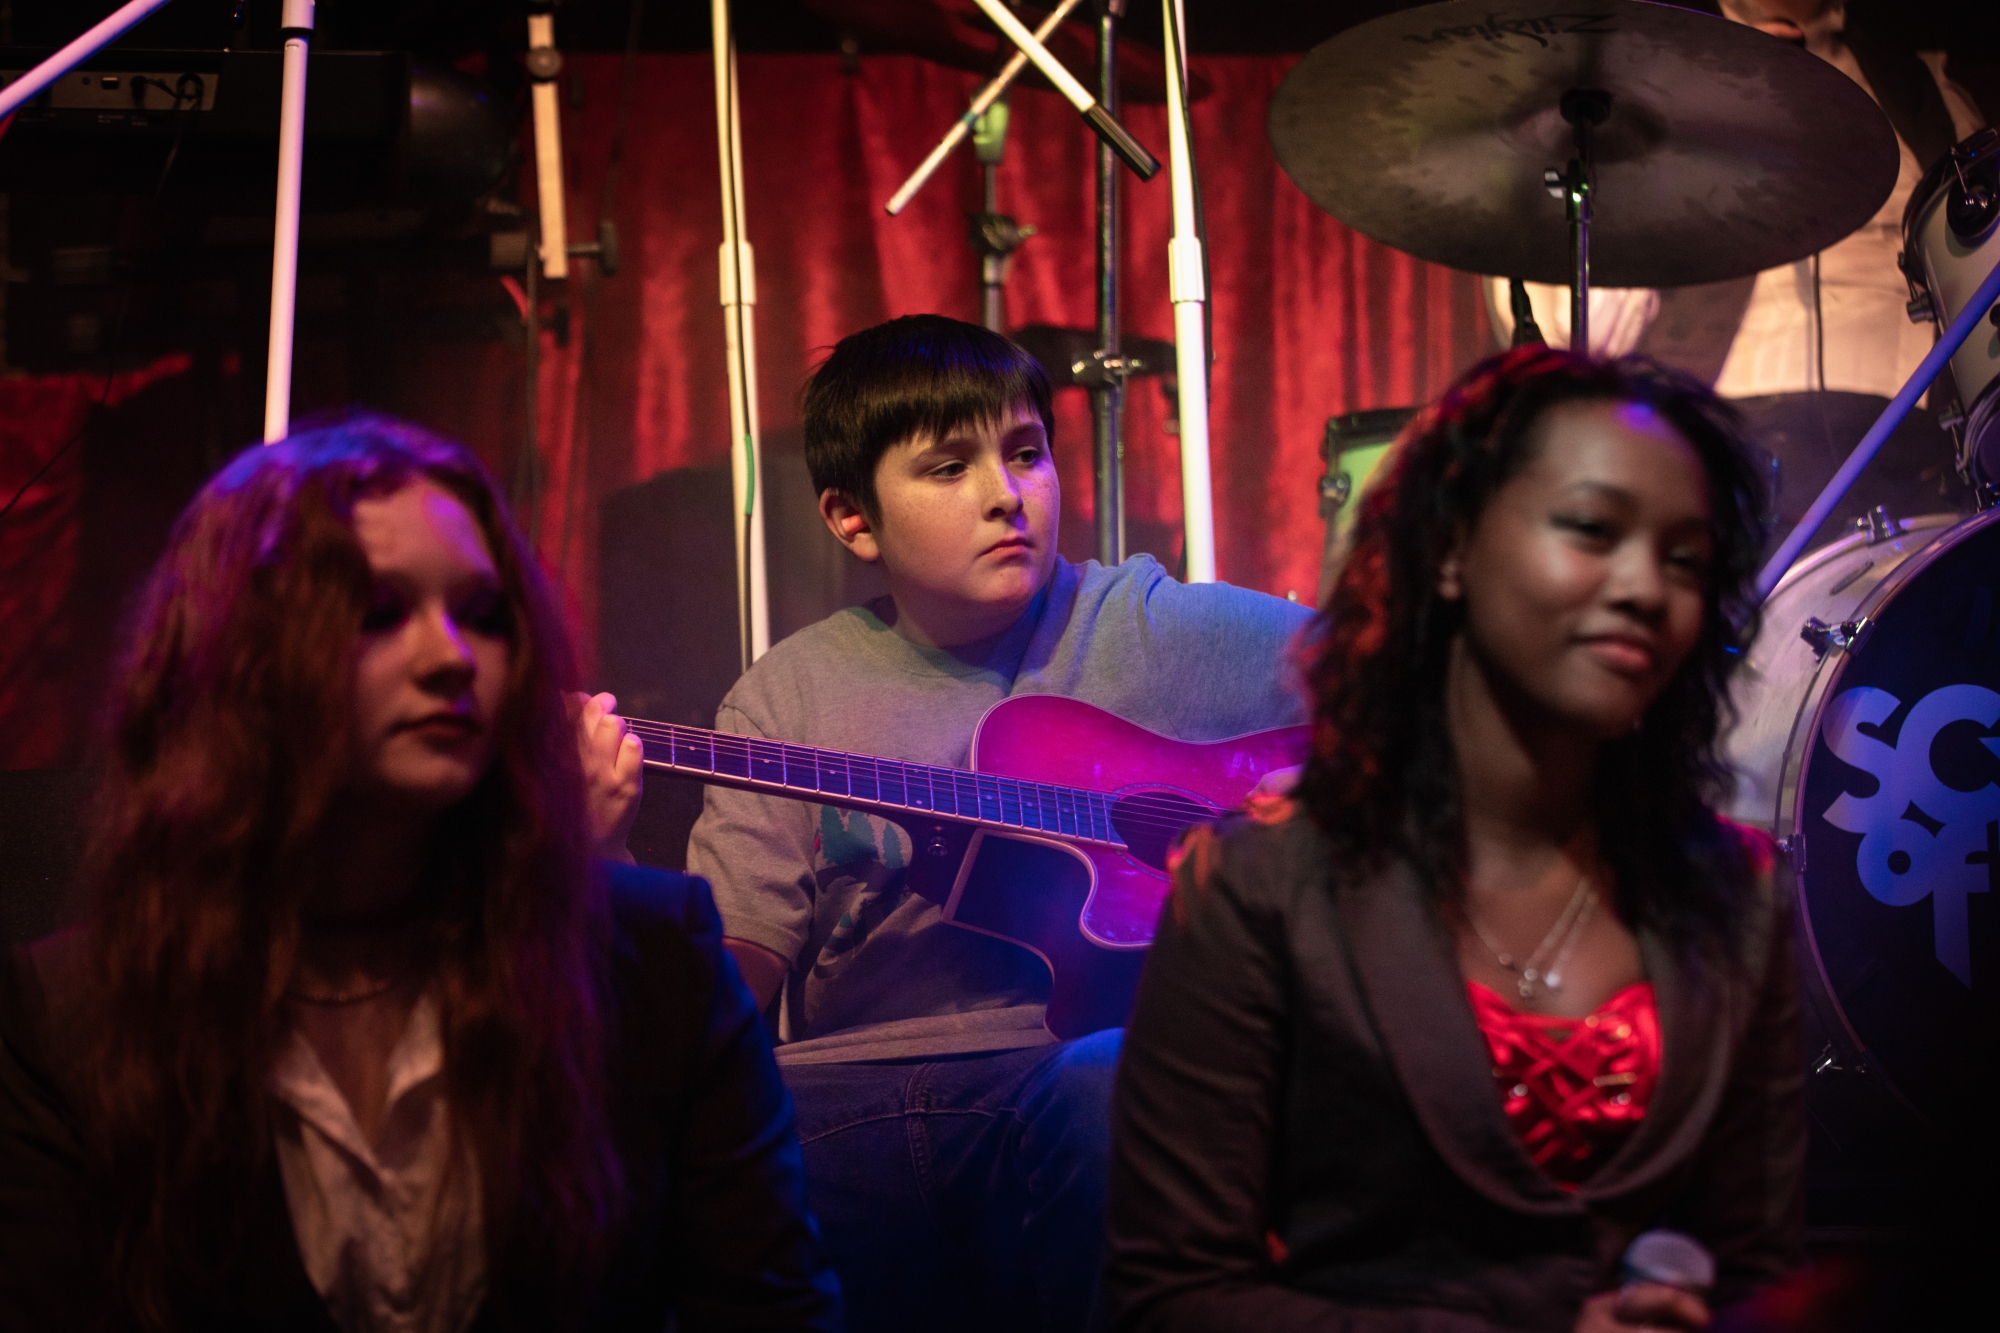 Learn to play live on stage with others at School of Rock.